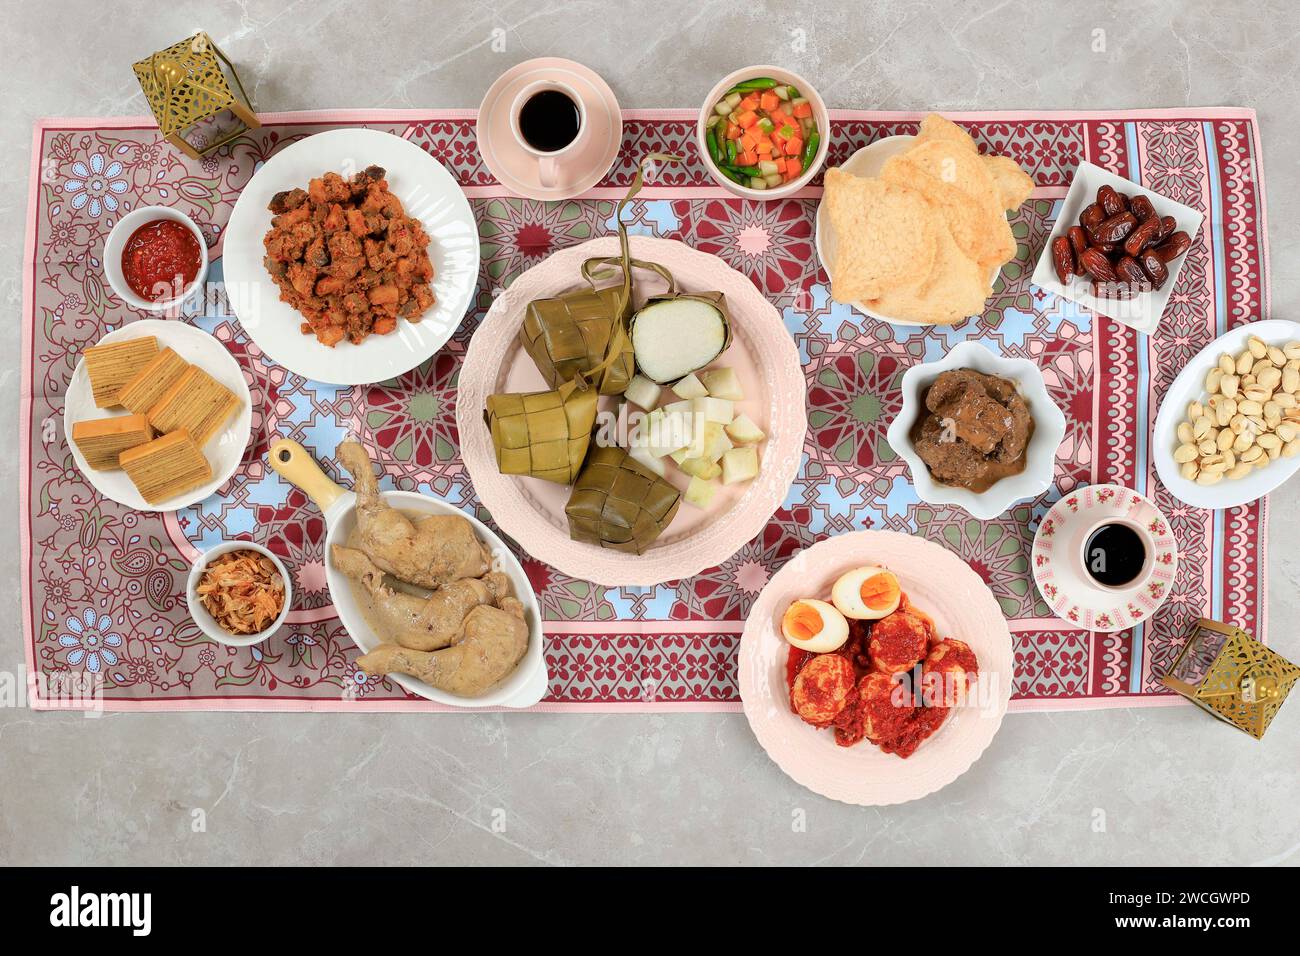 Top View Ketupat Lebaran Menu, Indonesian Celebratory Dish of Rice Cake with Various Side Dishes, Popular Served During Eid Celebrations. Stock Photo